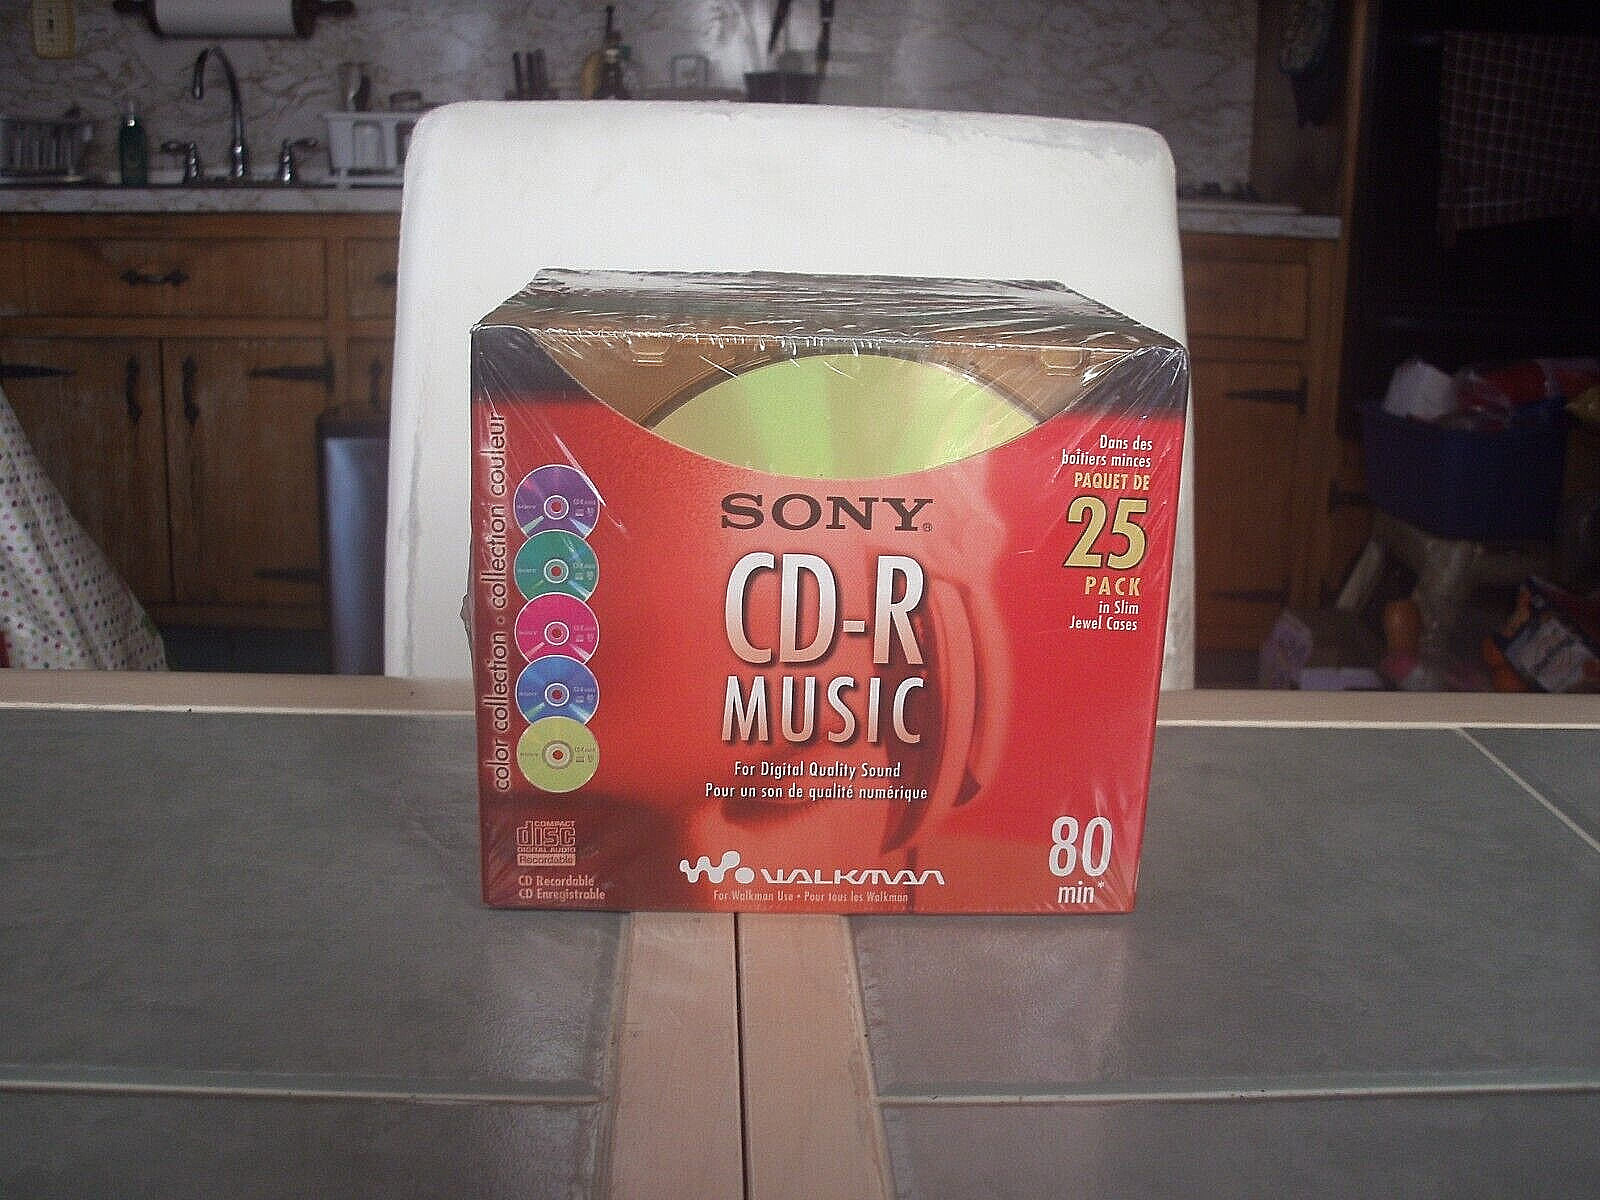 SONY CD-R MUSIC COLOR COLLECTION 25 PACK - NEW SEALED